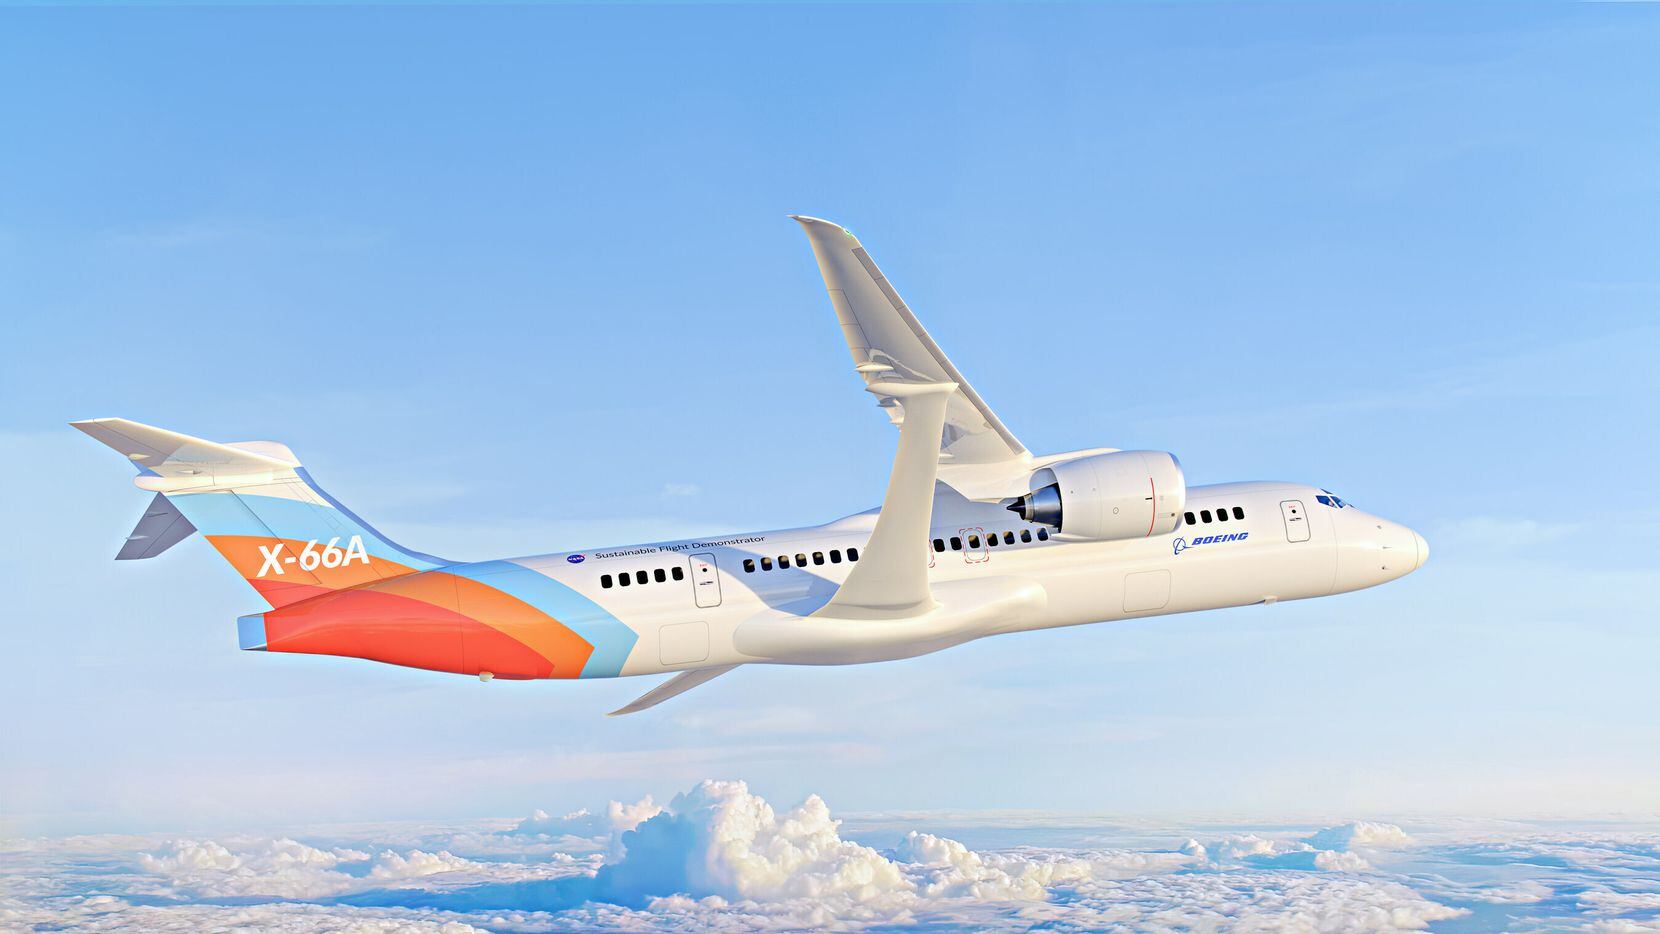 This could be the future aircraft for American and Southwest Airlines